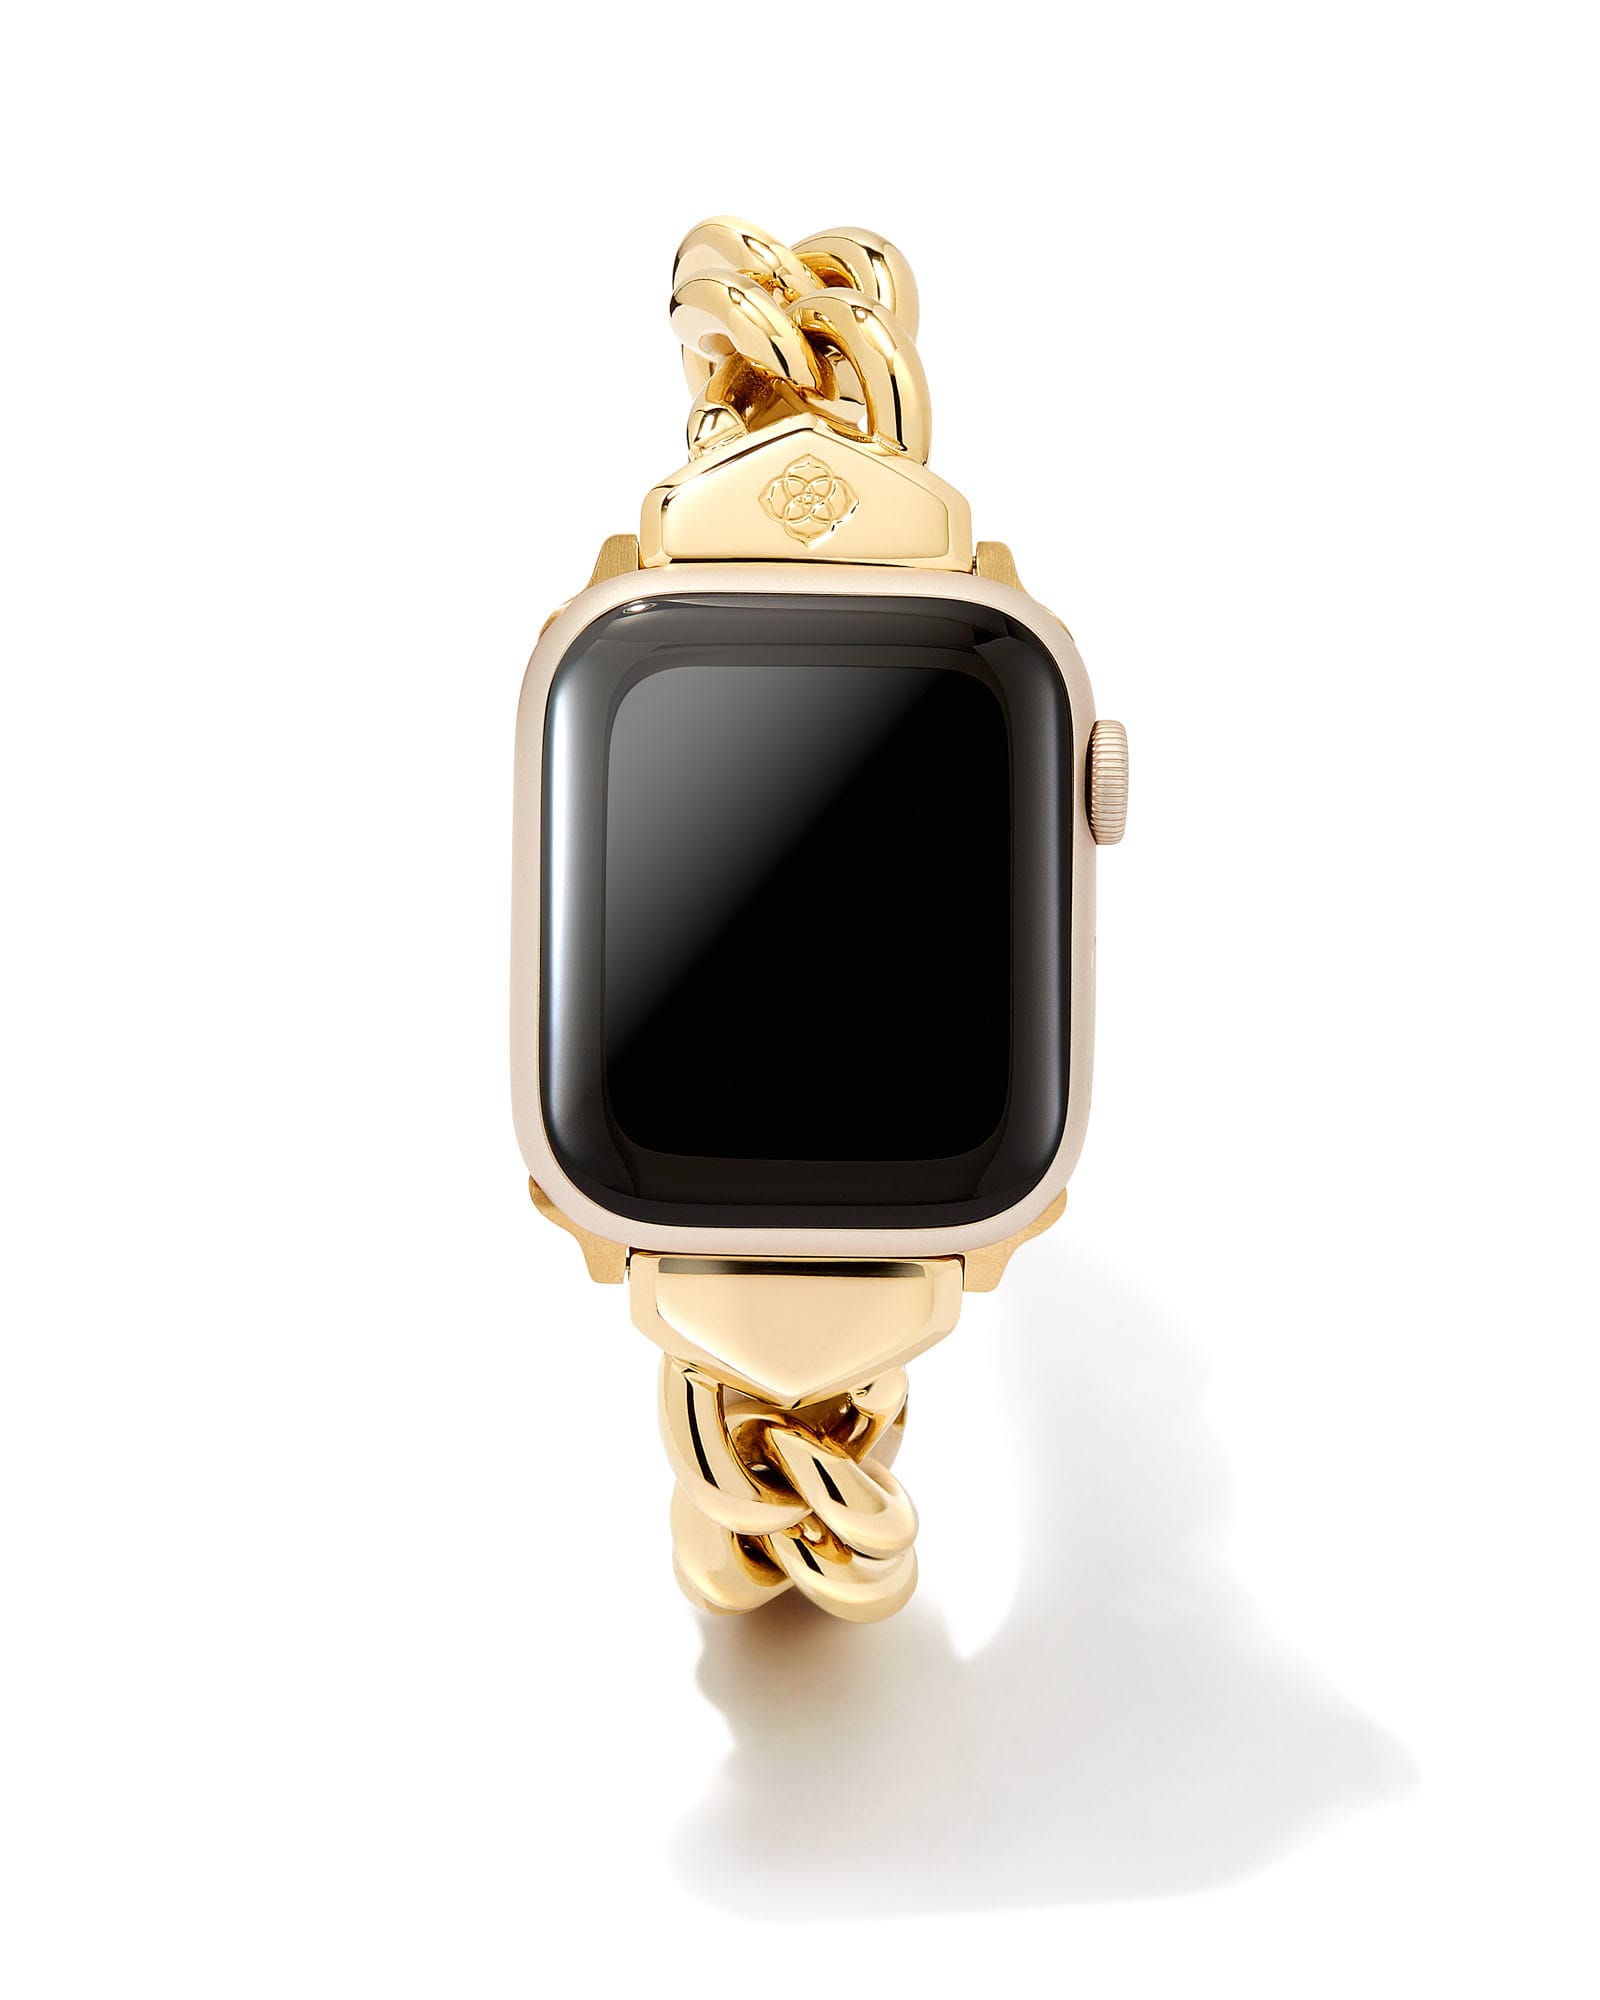 Decoration For Apple watch band Charms ultra 8 7 Diamond iWatch